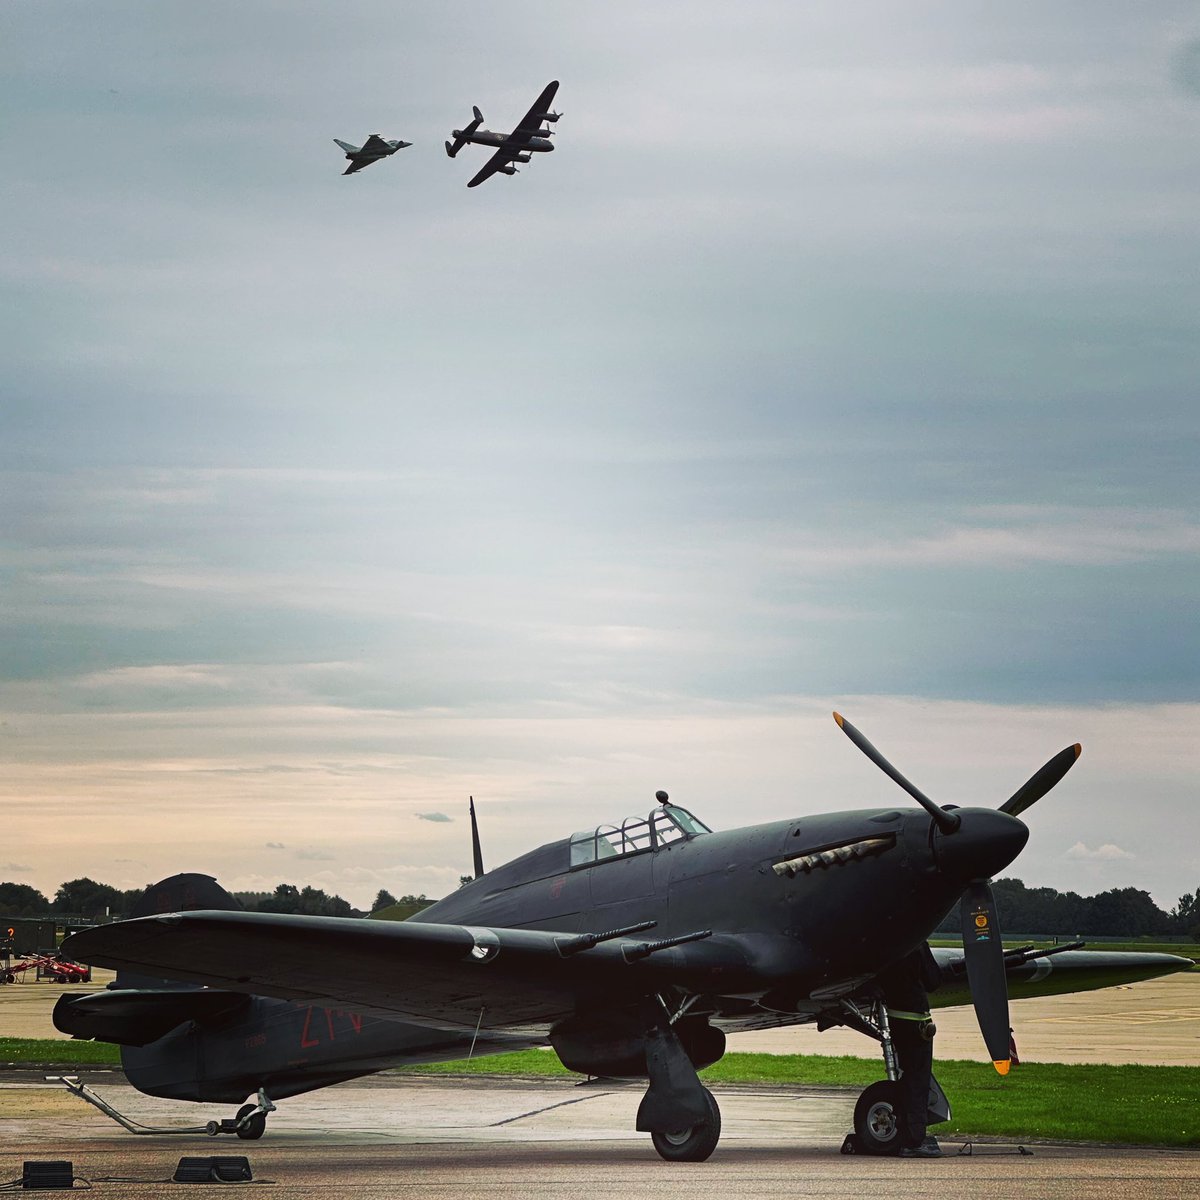 “The Last of the Many” @RAFBBMF Hawker Hurricane PZ865 (Mk IIC) - the last Hurricane built of 14,553 @RAFConingsby today. Typhoon and Lancaster 🤩 #BBMF #Typhoon #Lancaster #hawkerhurricane @RAFTyphoonTeam